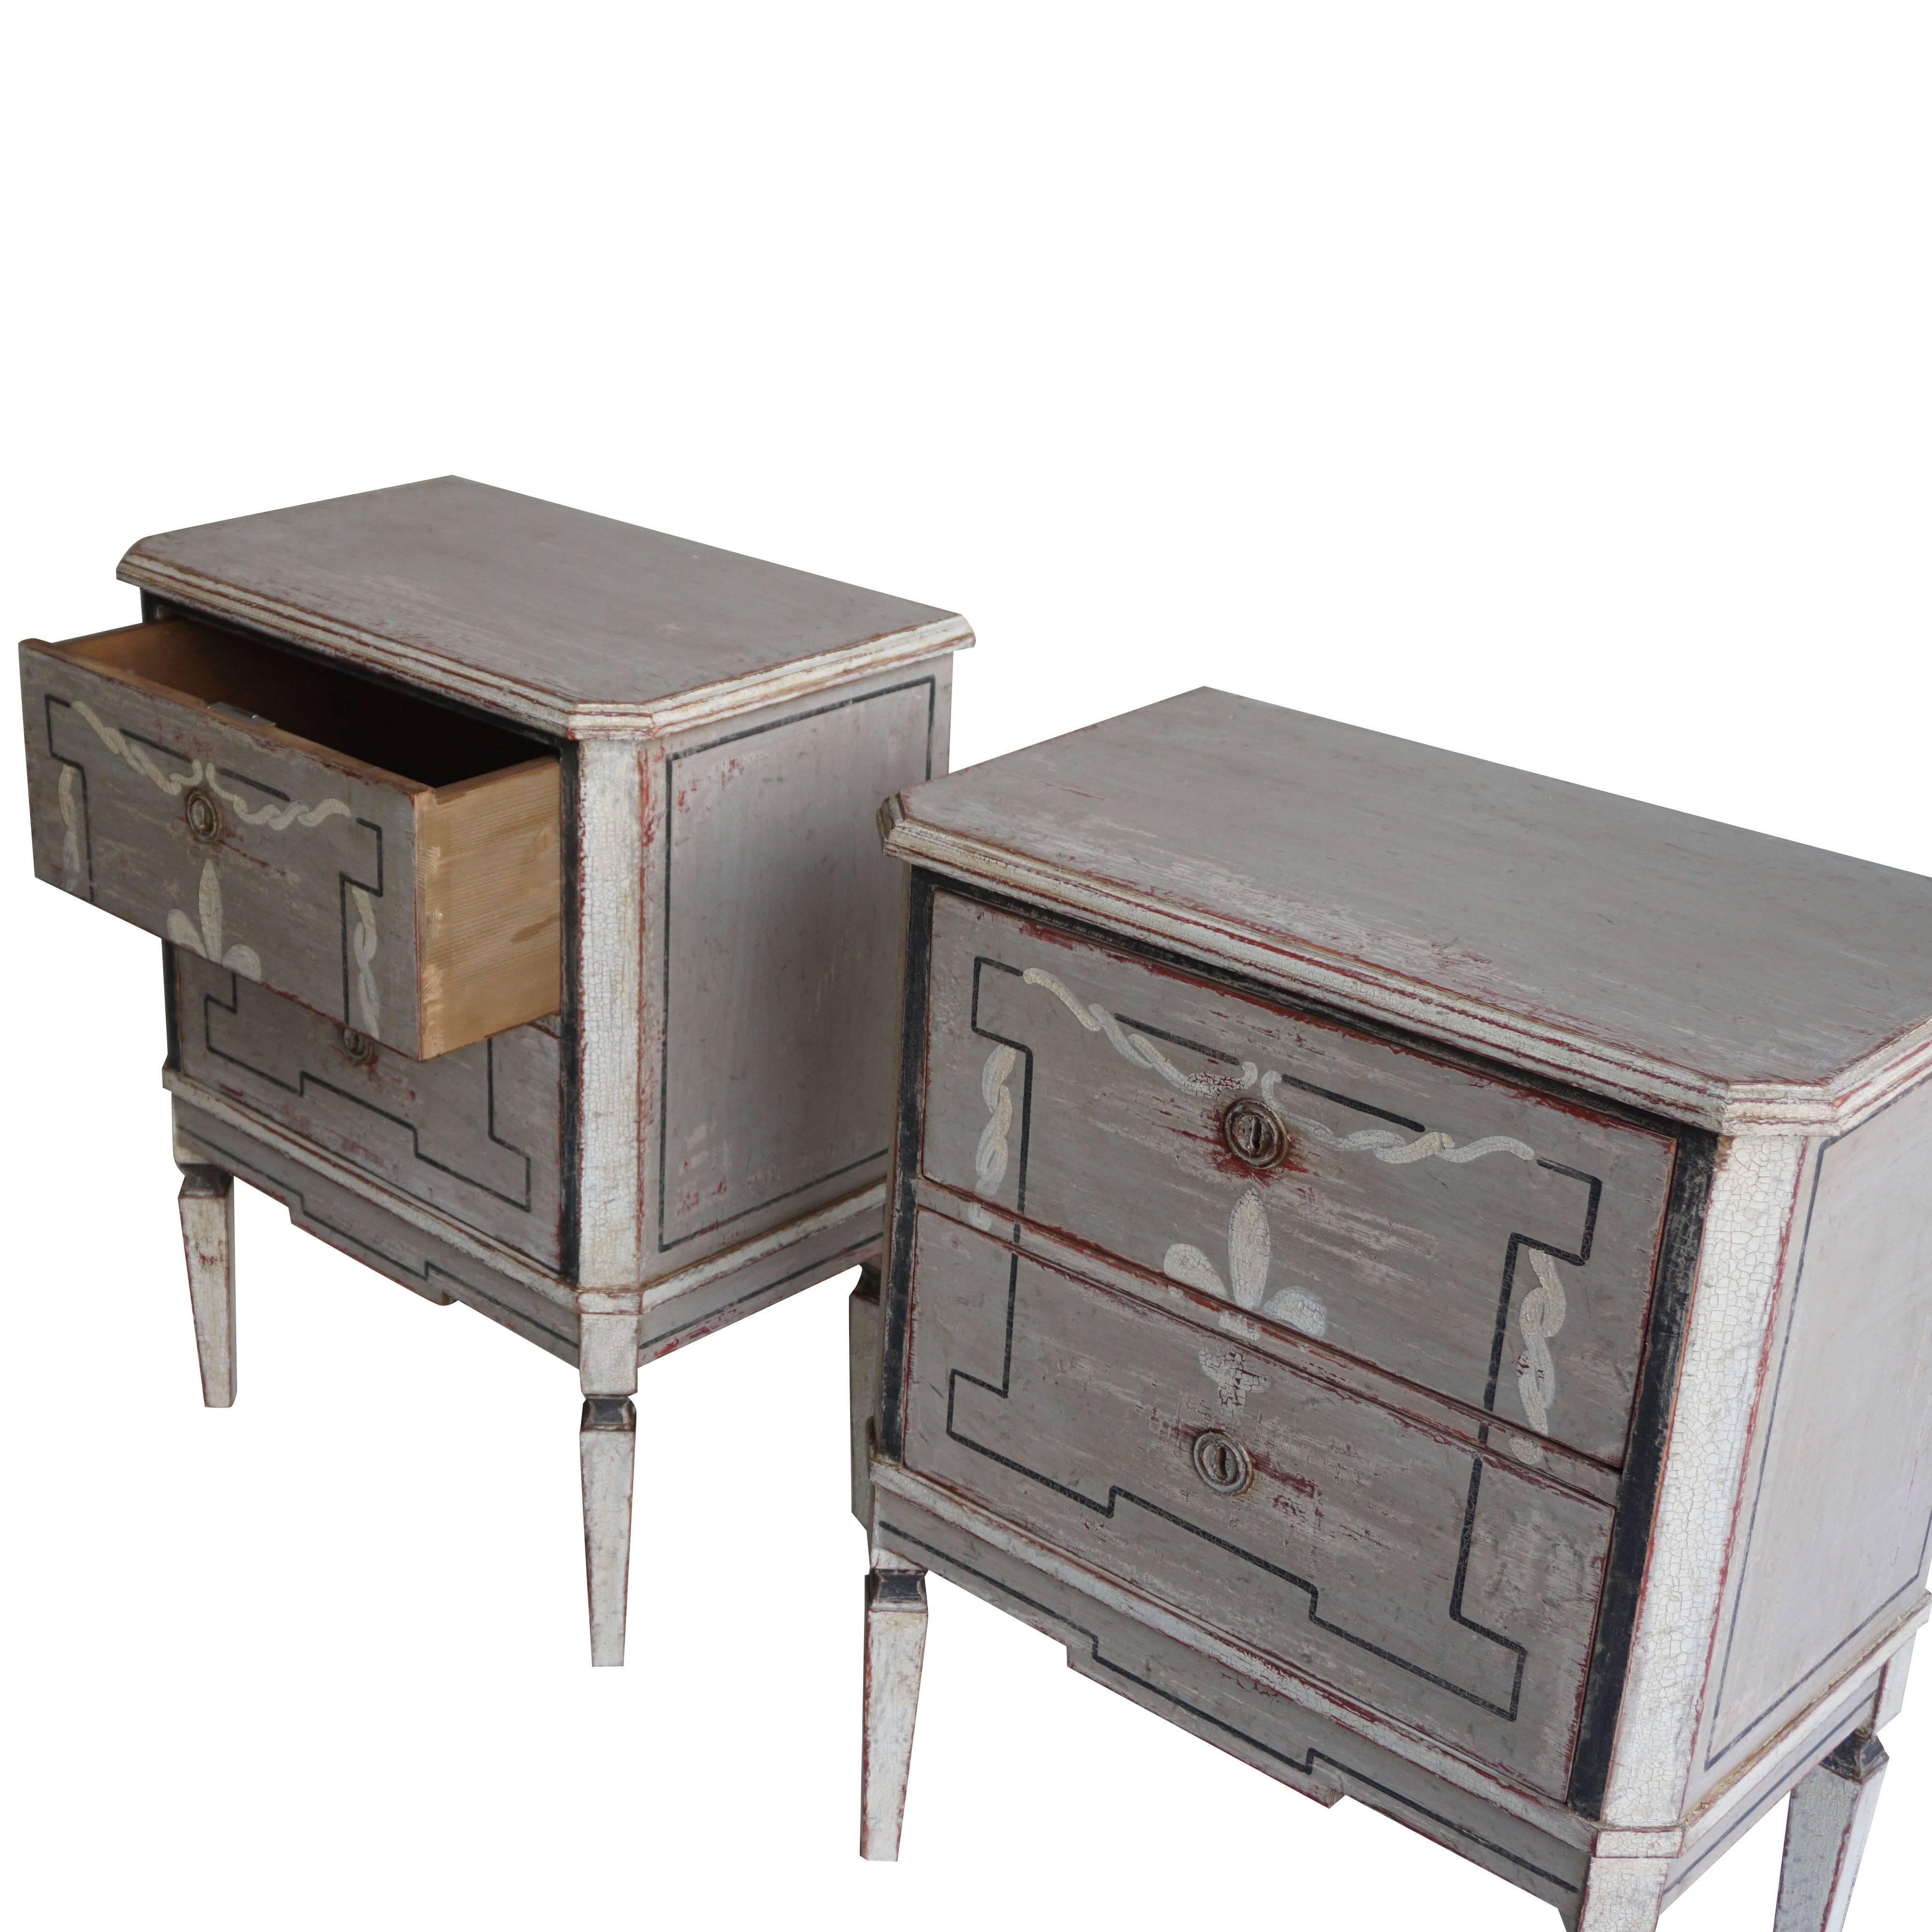 A pair of small handcrafted Swedish chests of drawers made of pinewood with a grey-white painted finish, fleur-de-lys decor on square tapered legs. The chests have two drawers with simple brass and hardware, circa 1880 Sweden, Scandinavia.